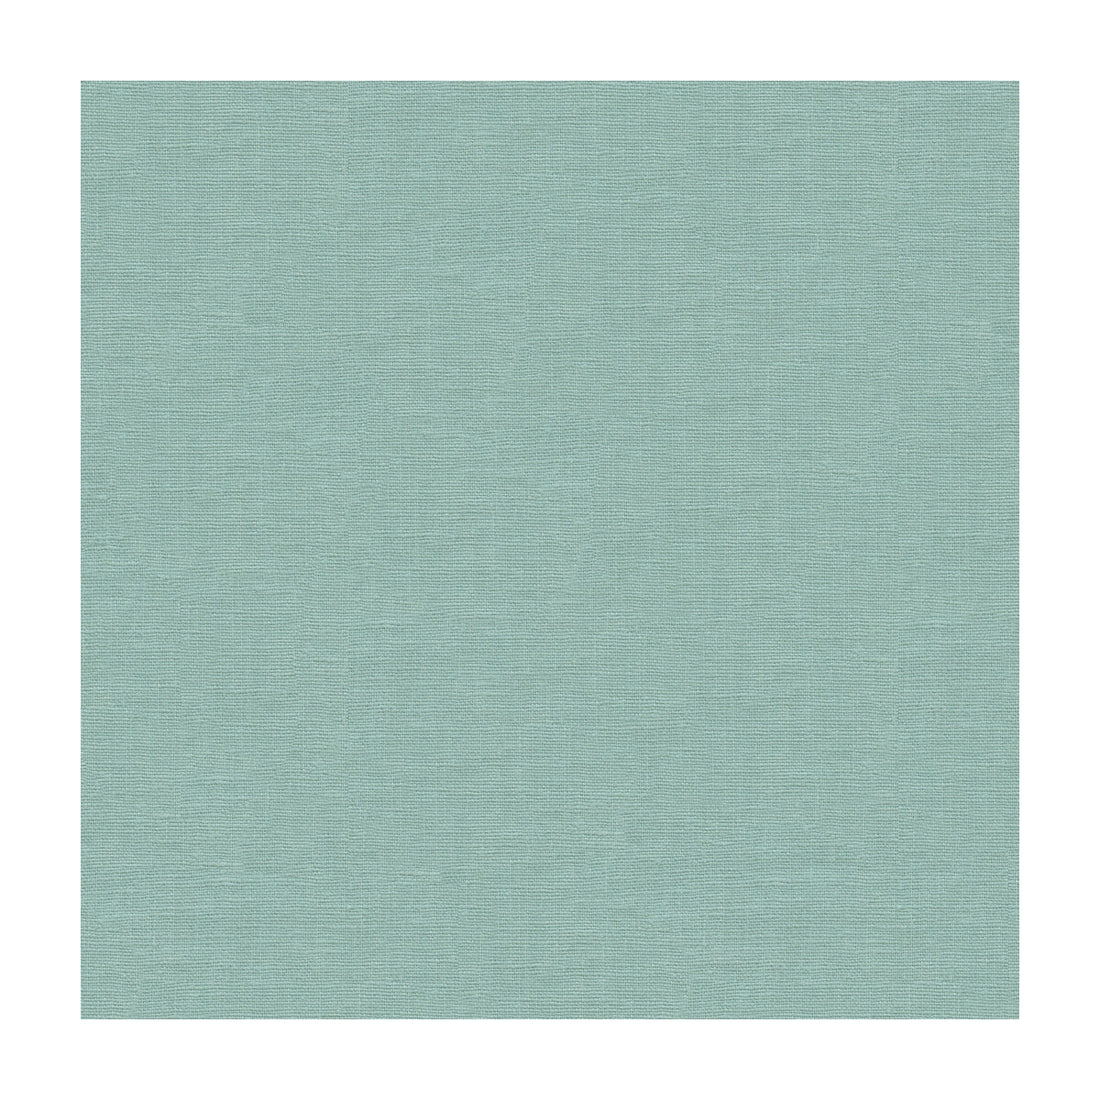 Dublin Linen fabric in spa color - pattern 2012175.15.0 - by Lee Jofa in the Colour Complements II collection